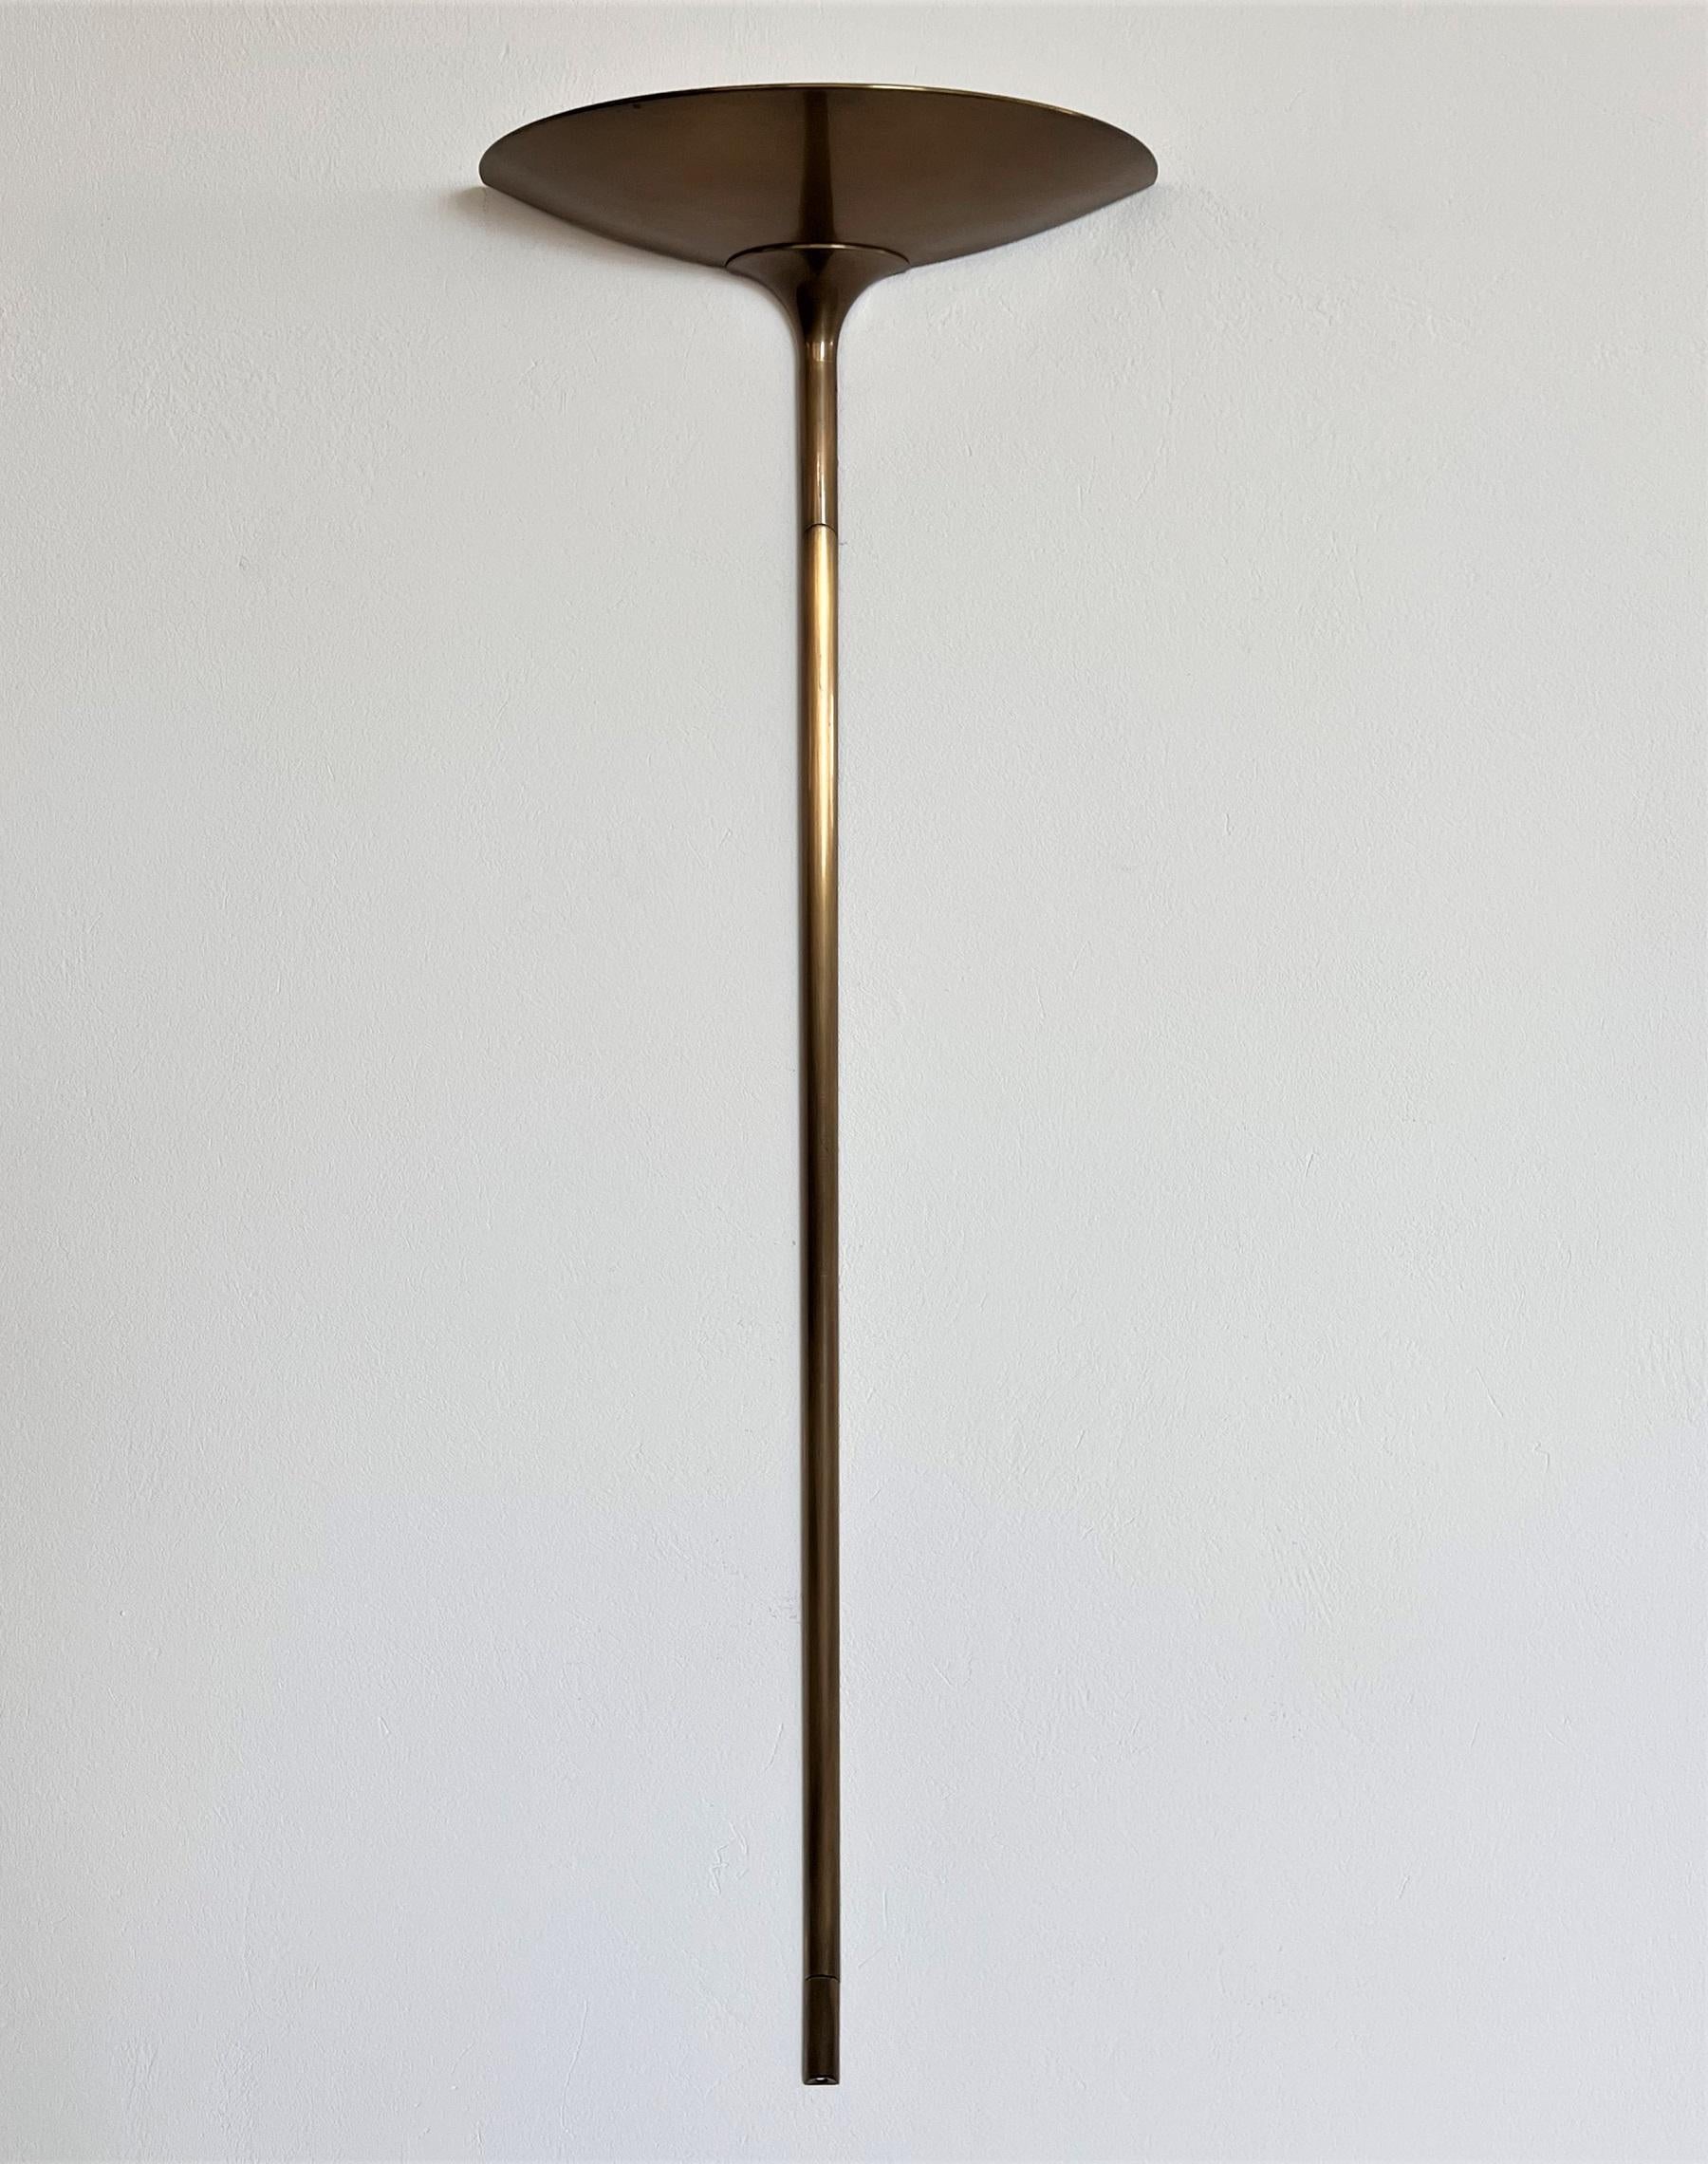 Florian Schulz Vintage Wall Sconce in Brushed Brass, 1970s For Sale 6